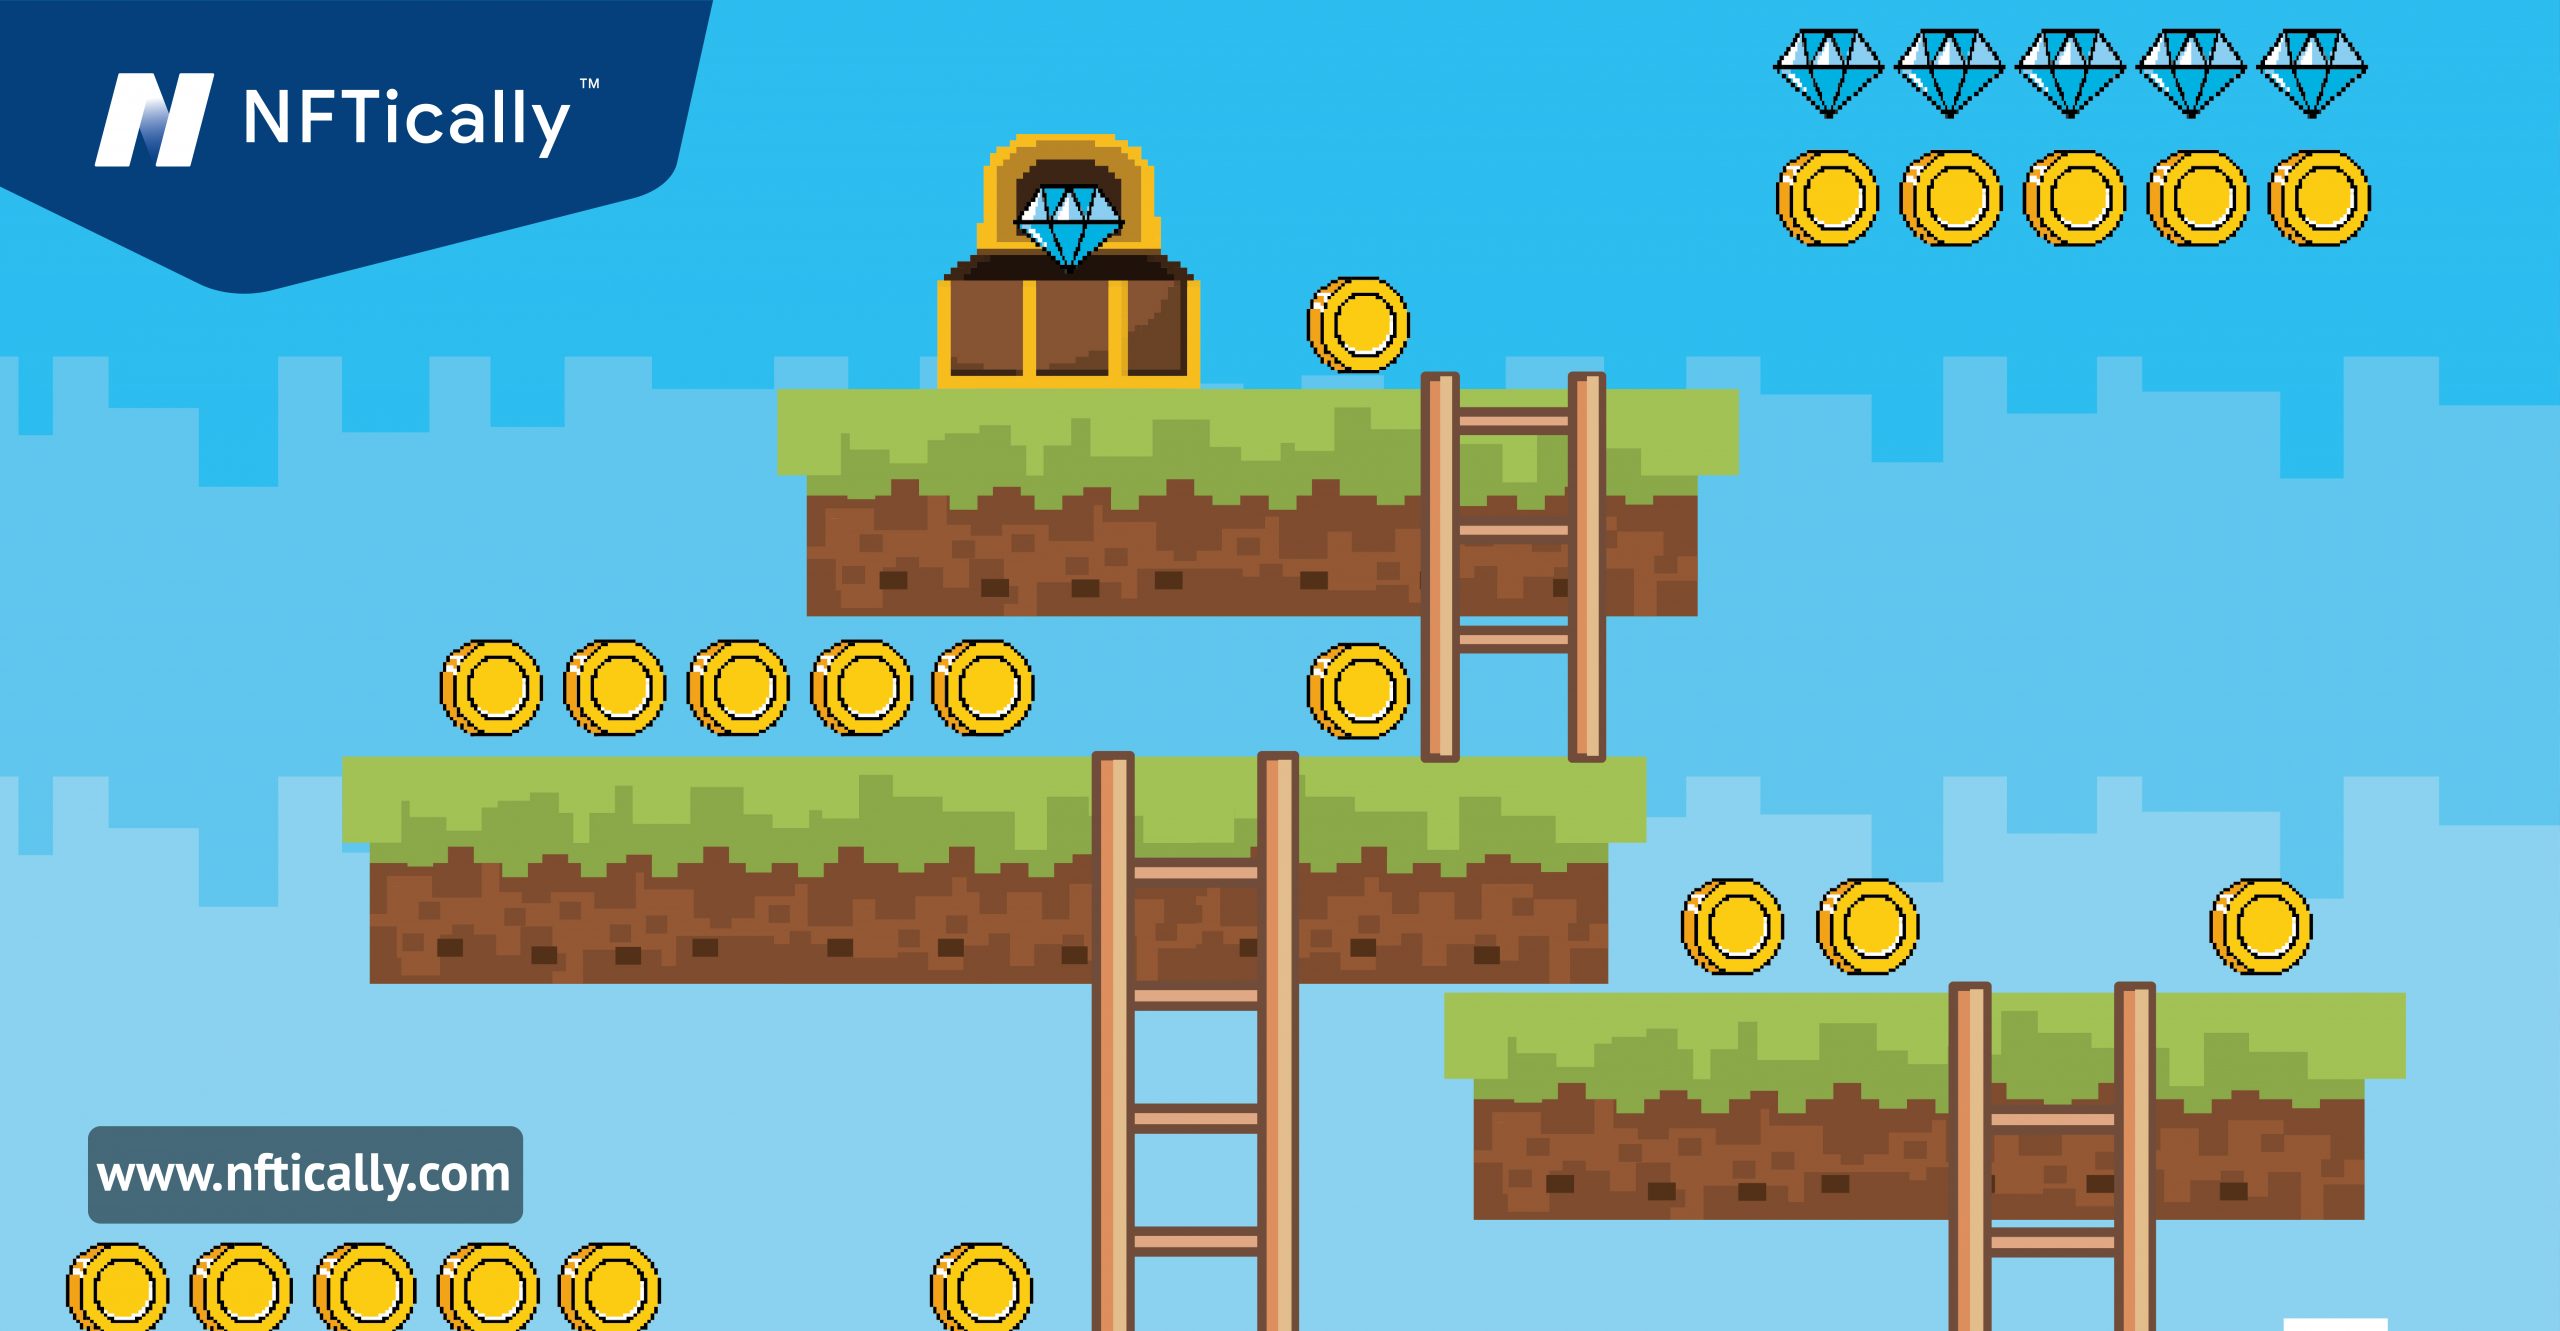 First Play-To-Earn NFT Web-Based Game on the Blockchain